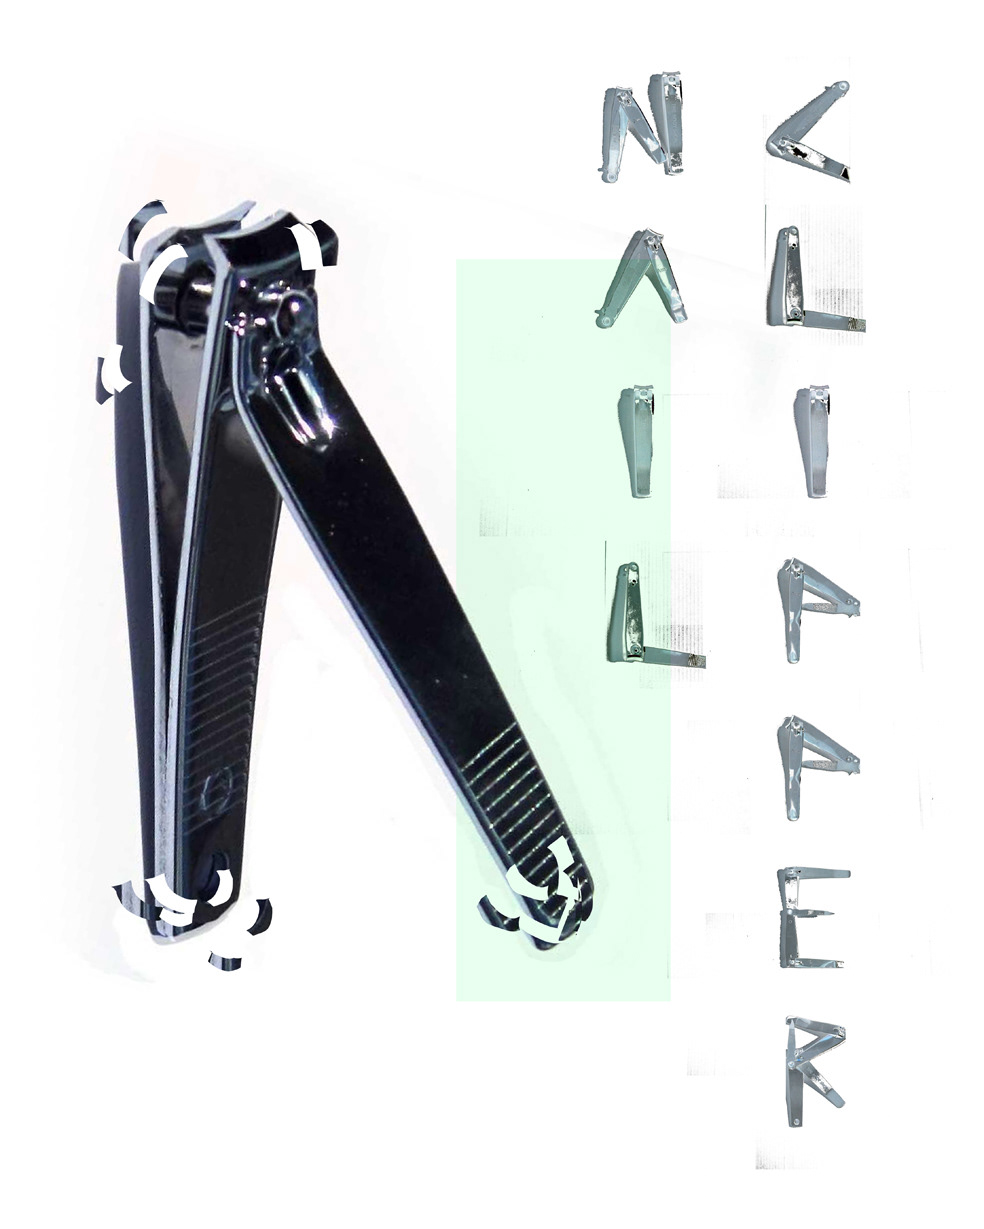 nailclippers nail Clipper clippers nail typography clippers type funny experimental